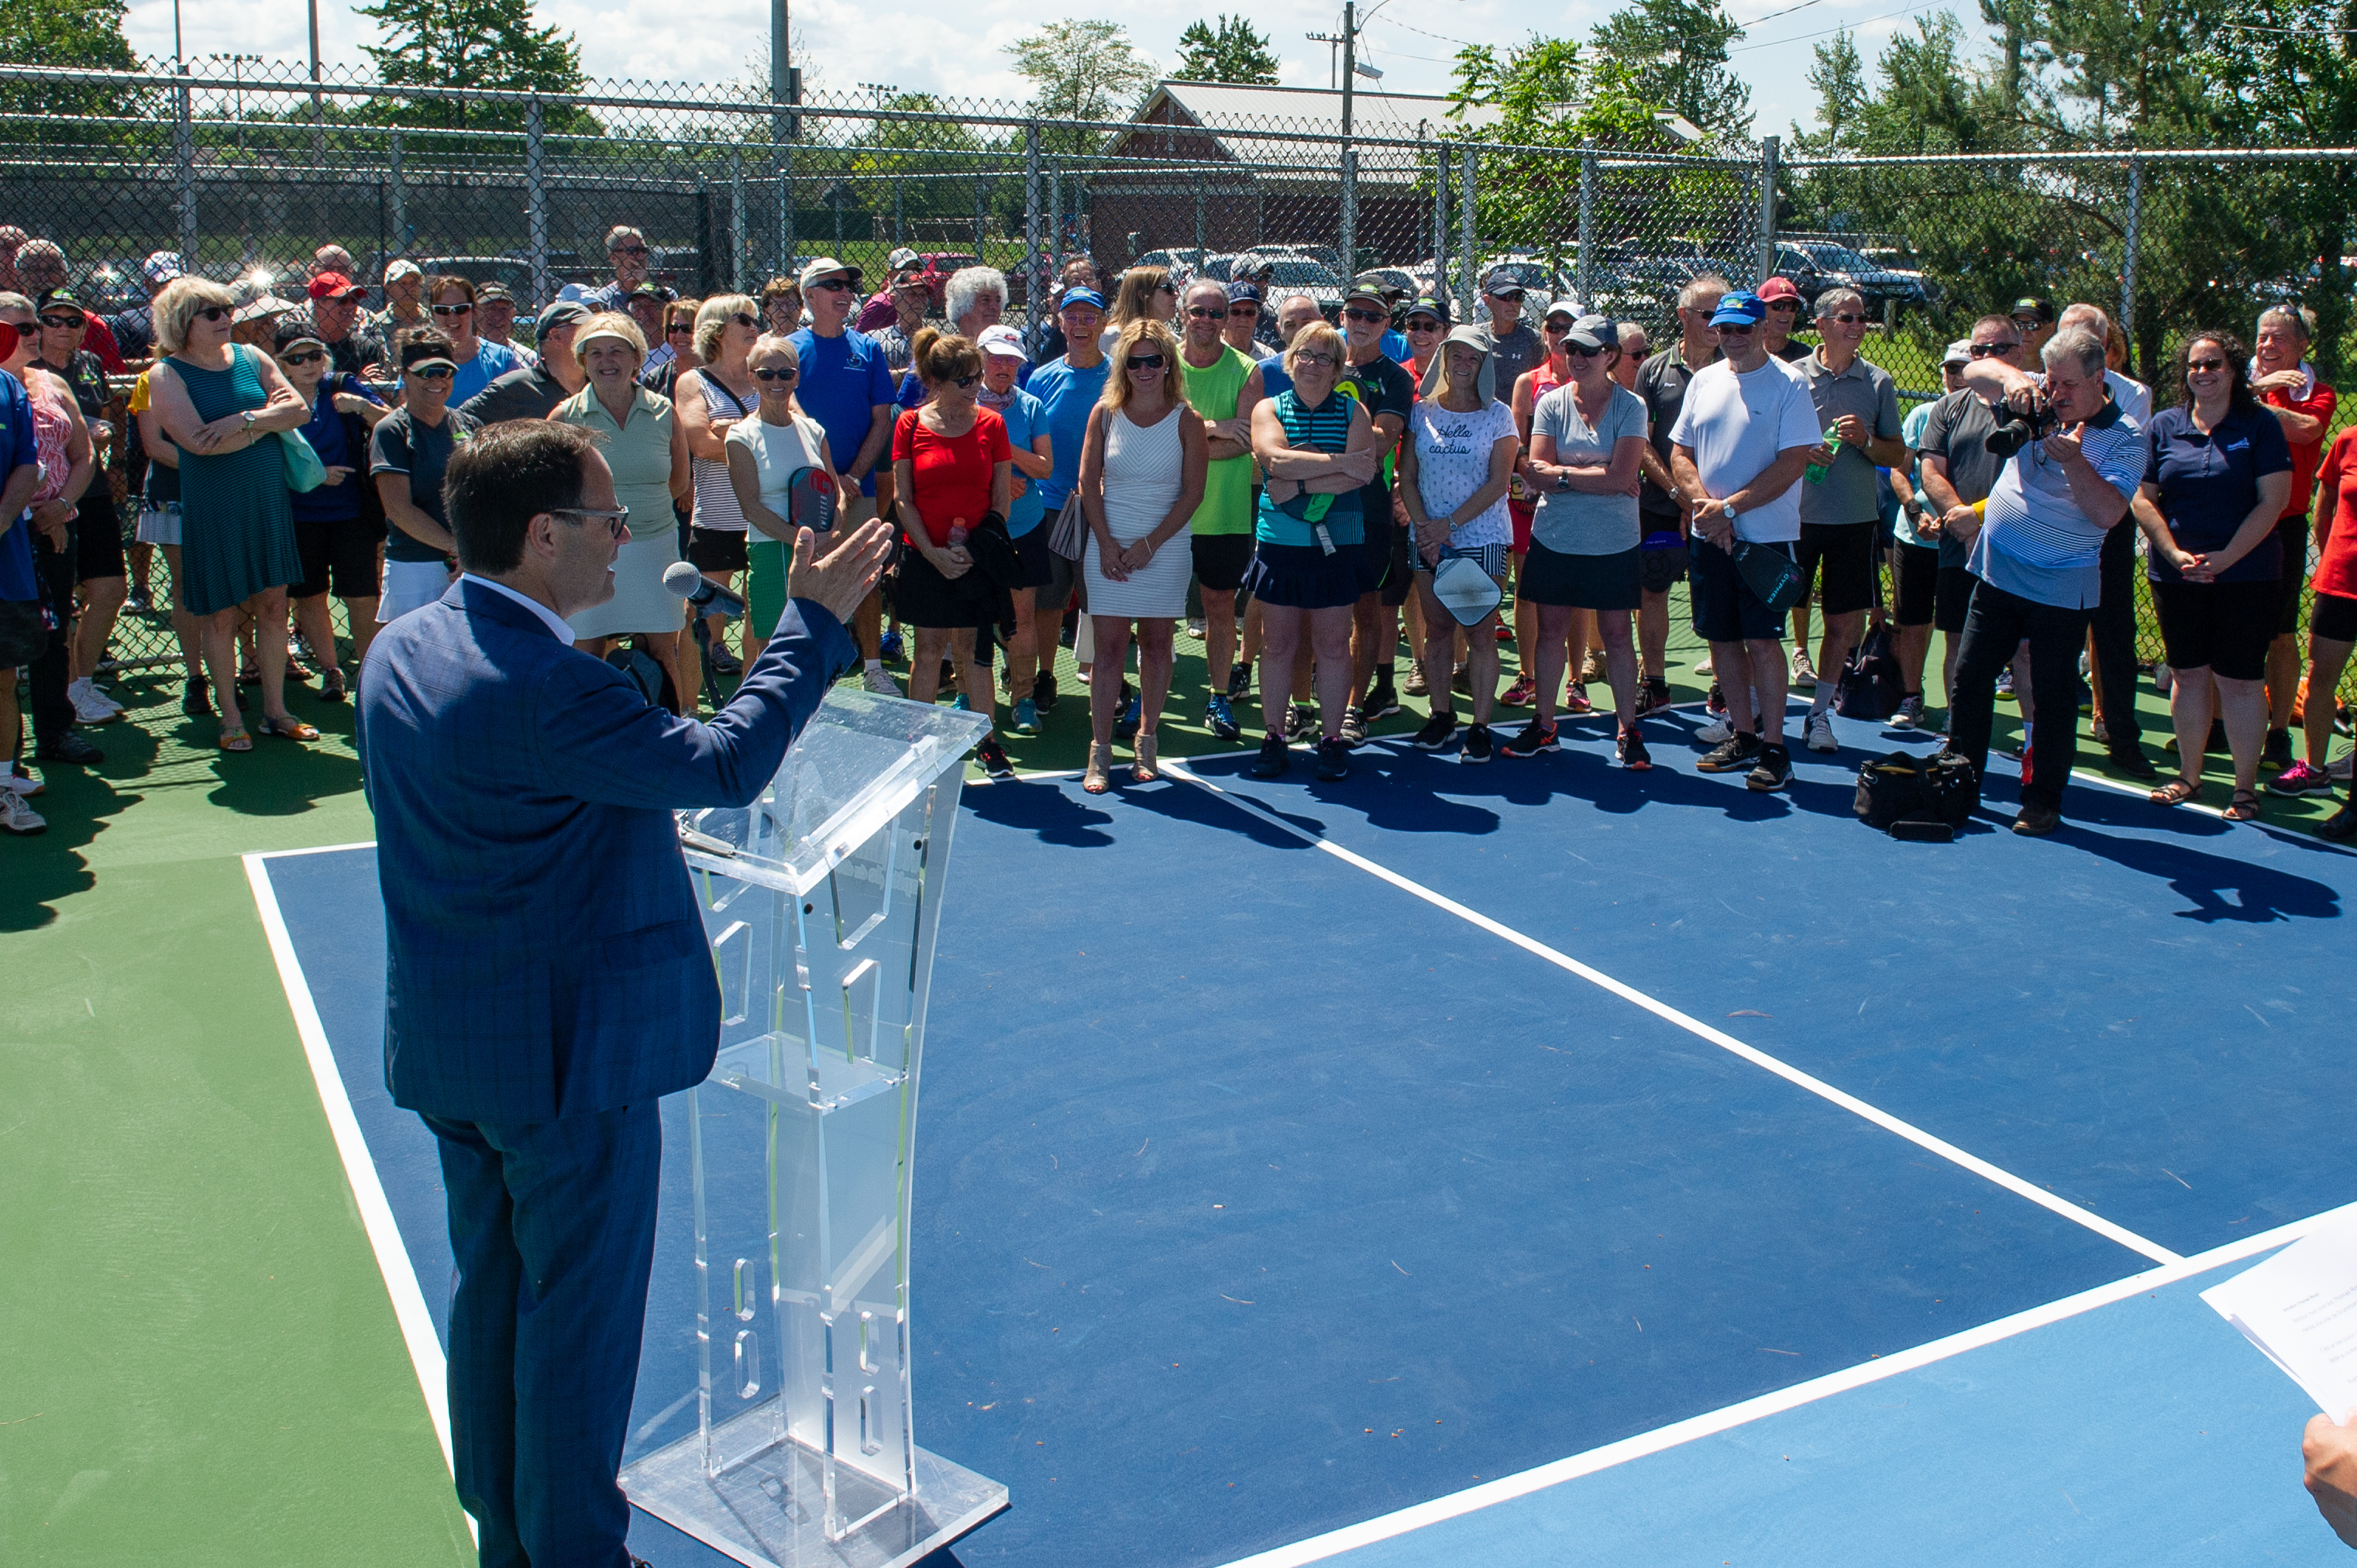 Distinctive amenities in Quebec for pickleball